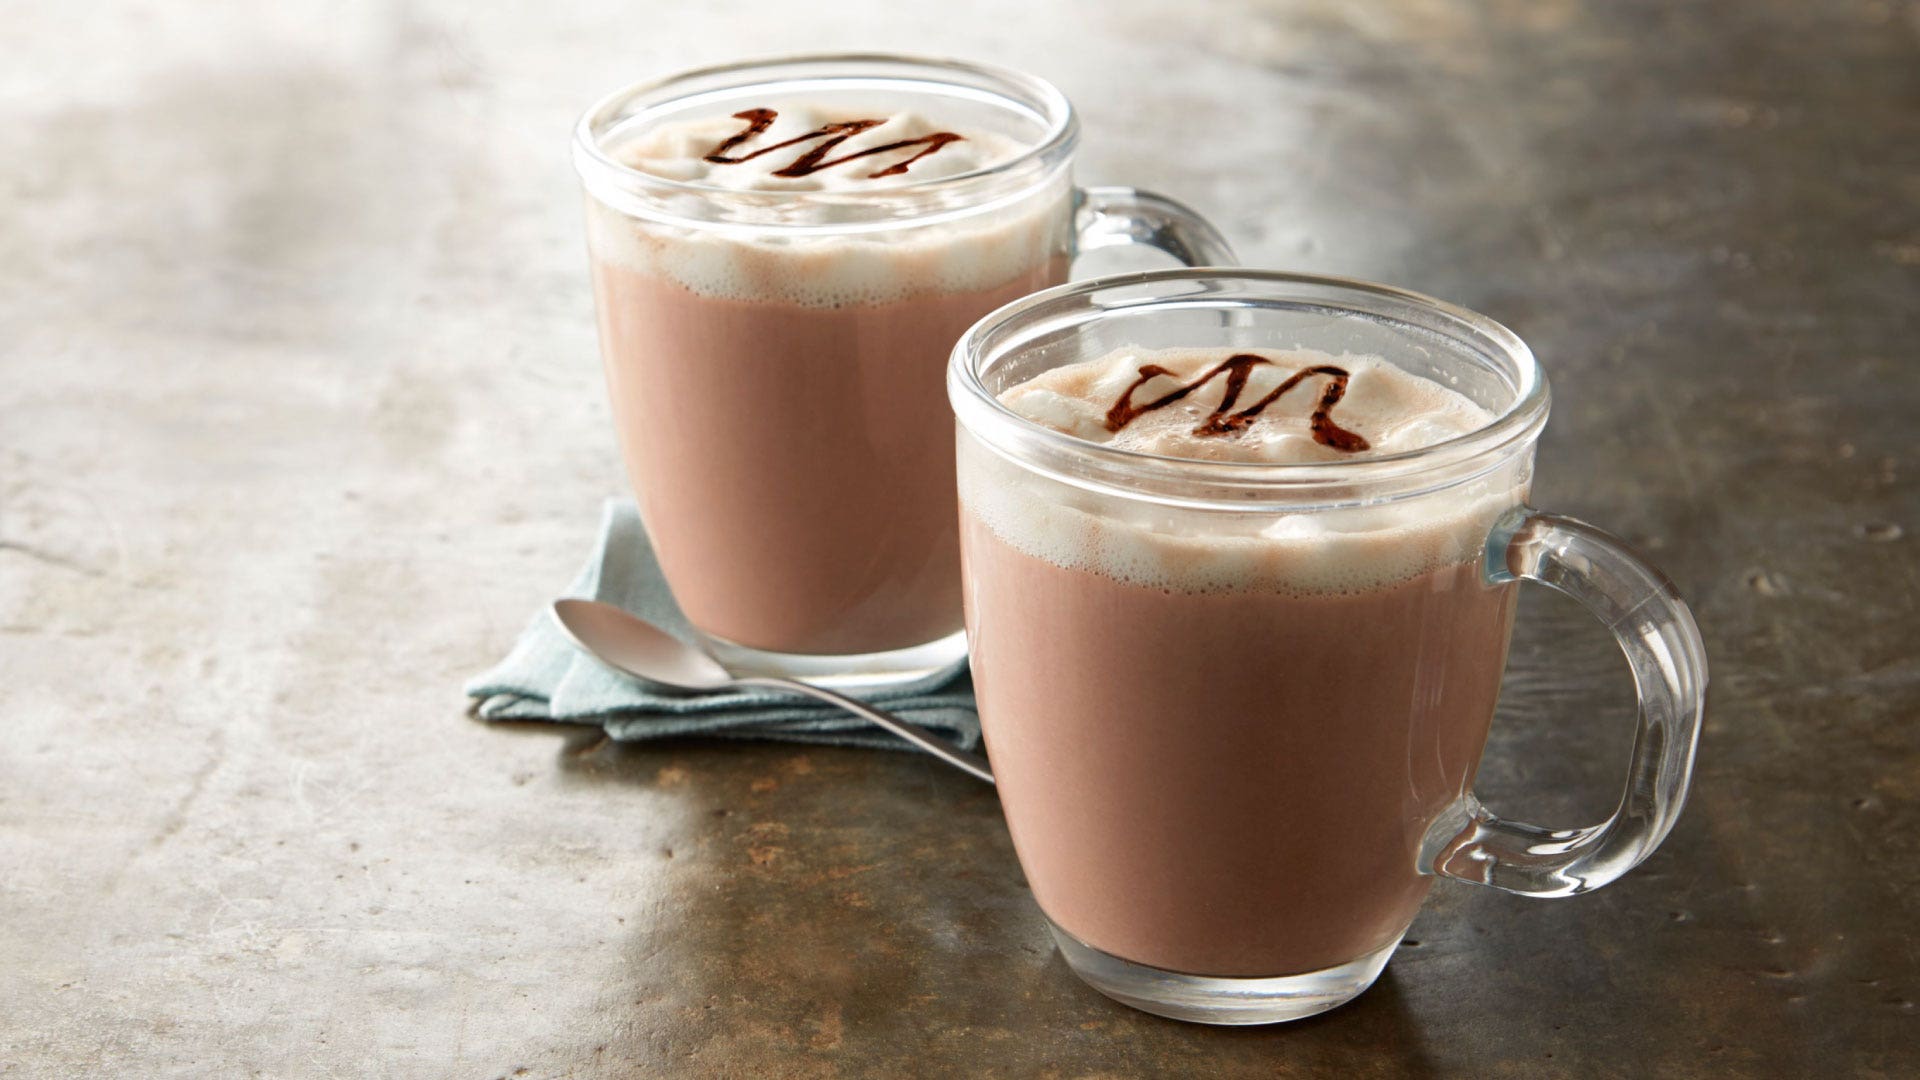 HERSHEY’S ‟Perfectly Chocolate” Hot Cocoa